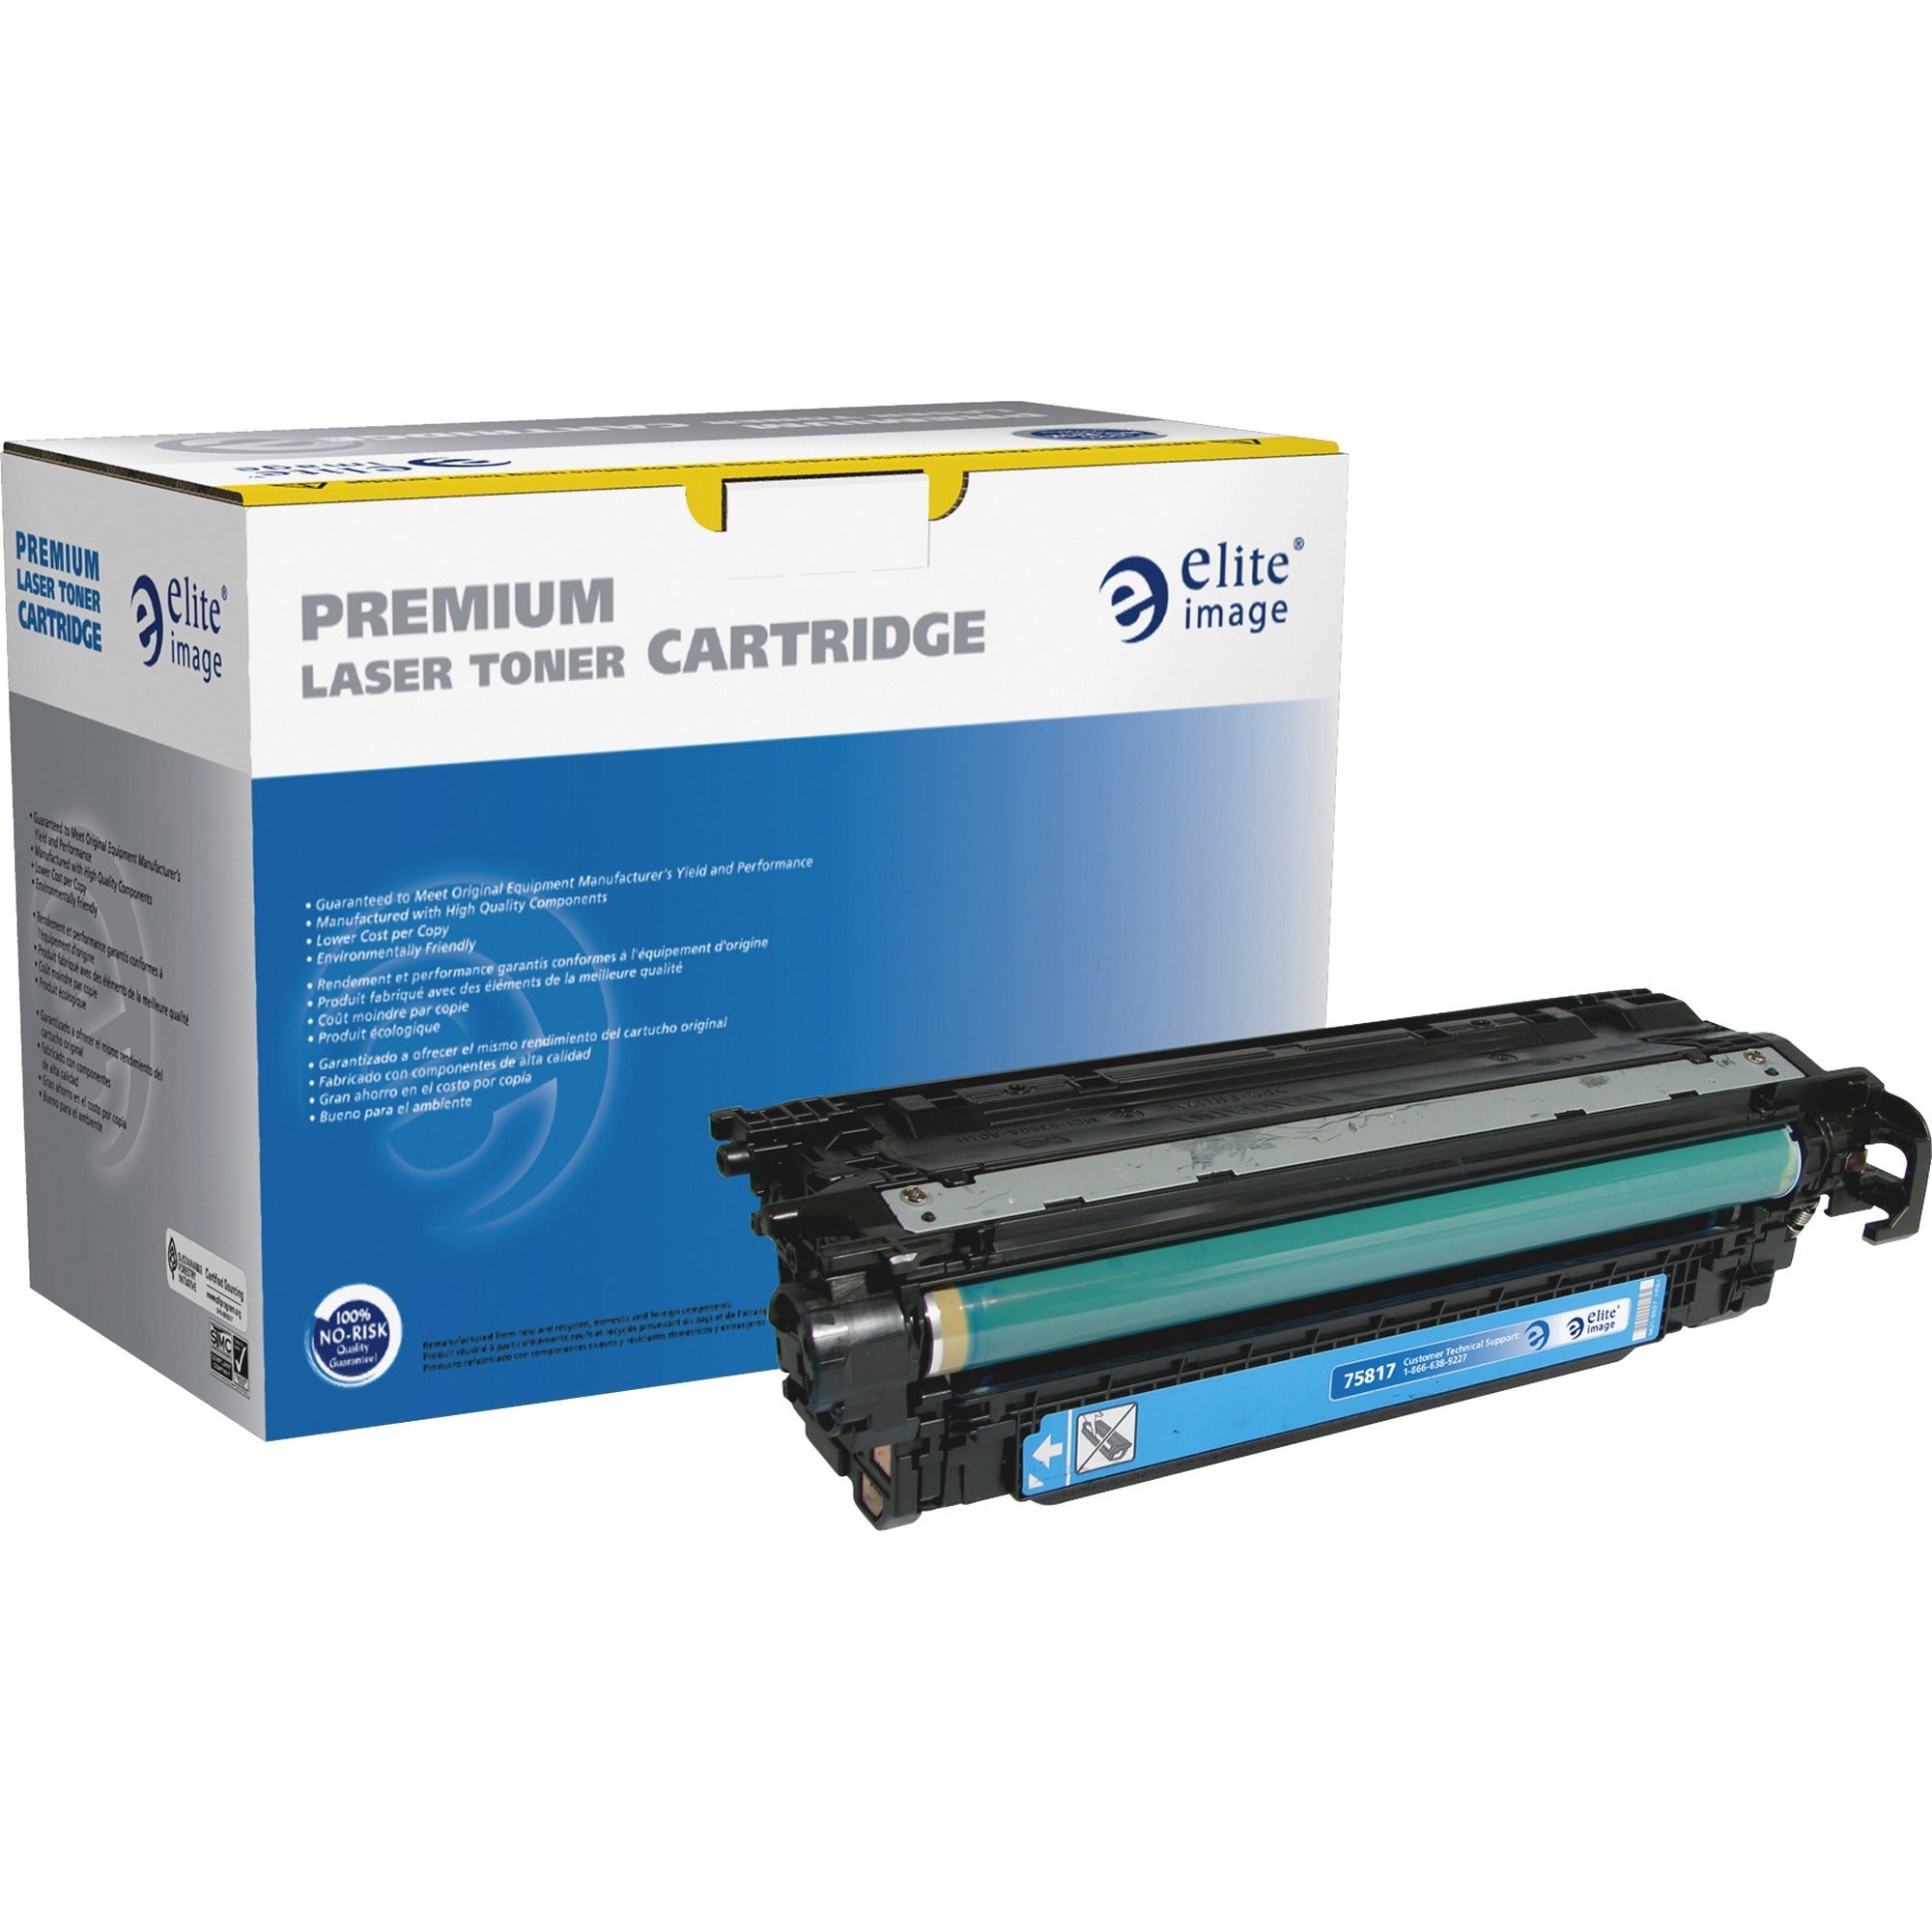 Elite Image Remanufactured Laser Toner Cartridge - Alternative for HP 507A (CE401A) - Cyan - 1 Each - 6000 Pages - 1